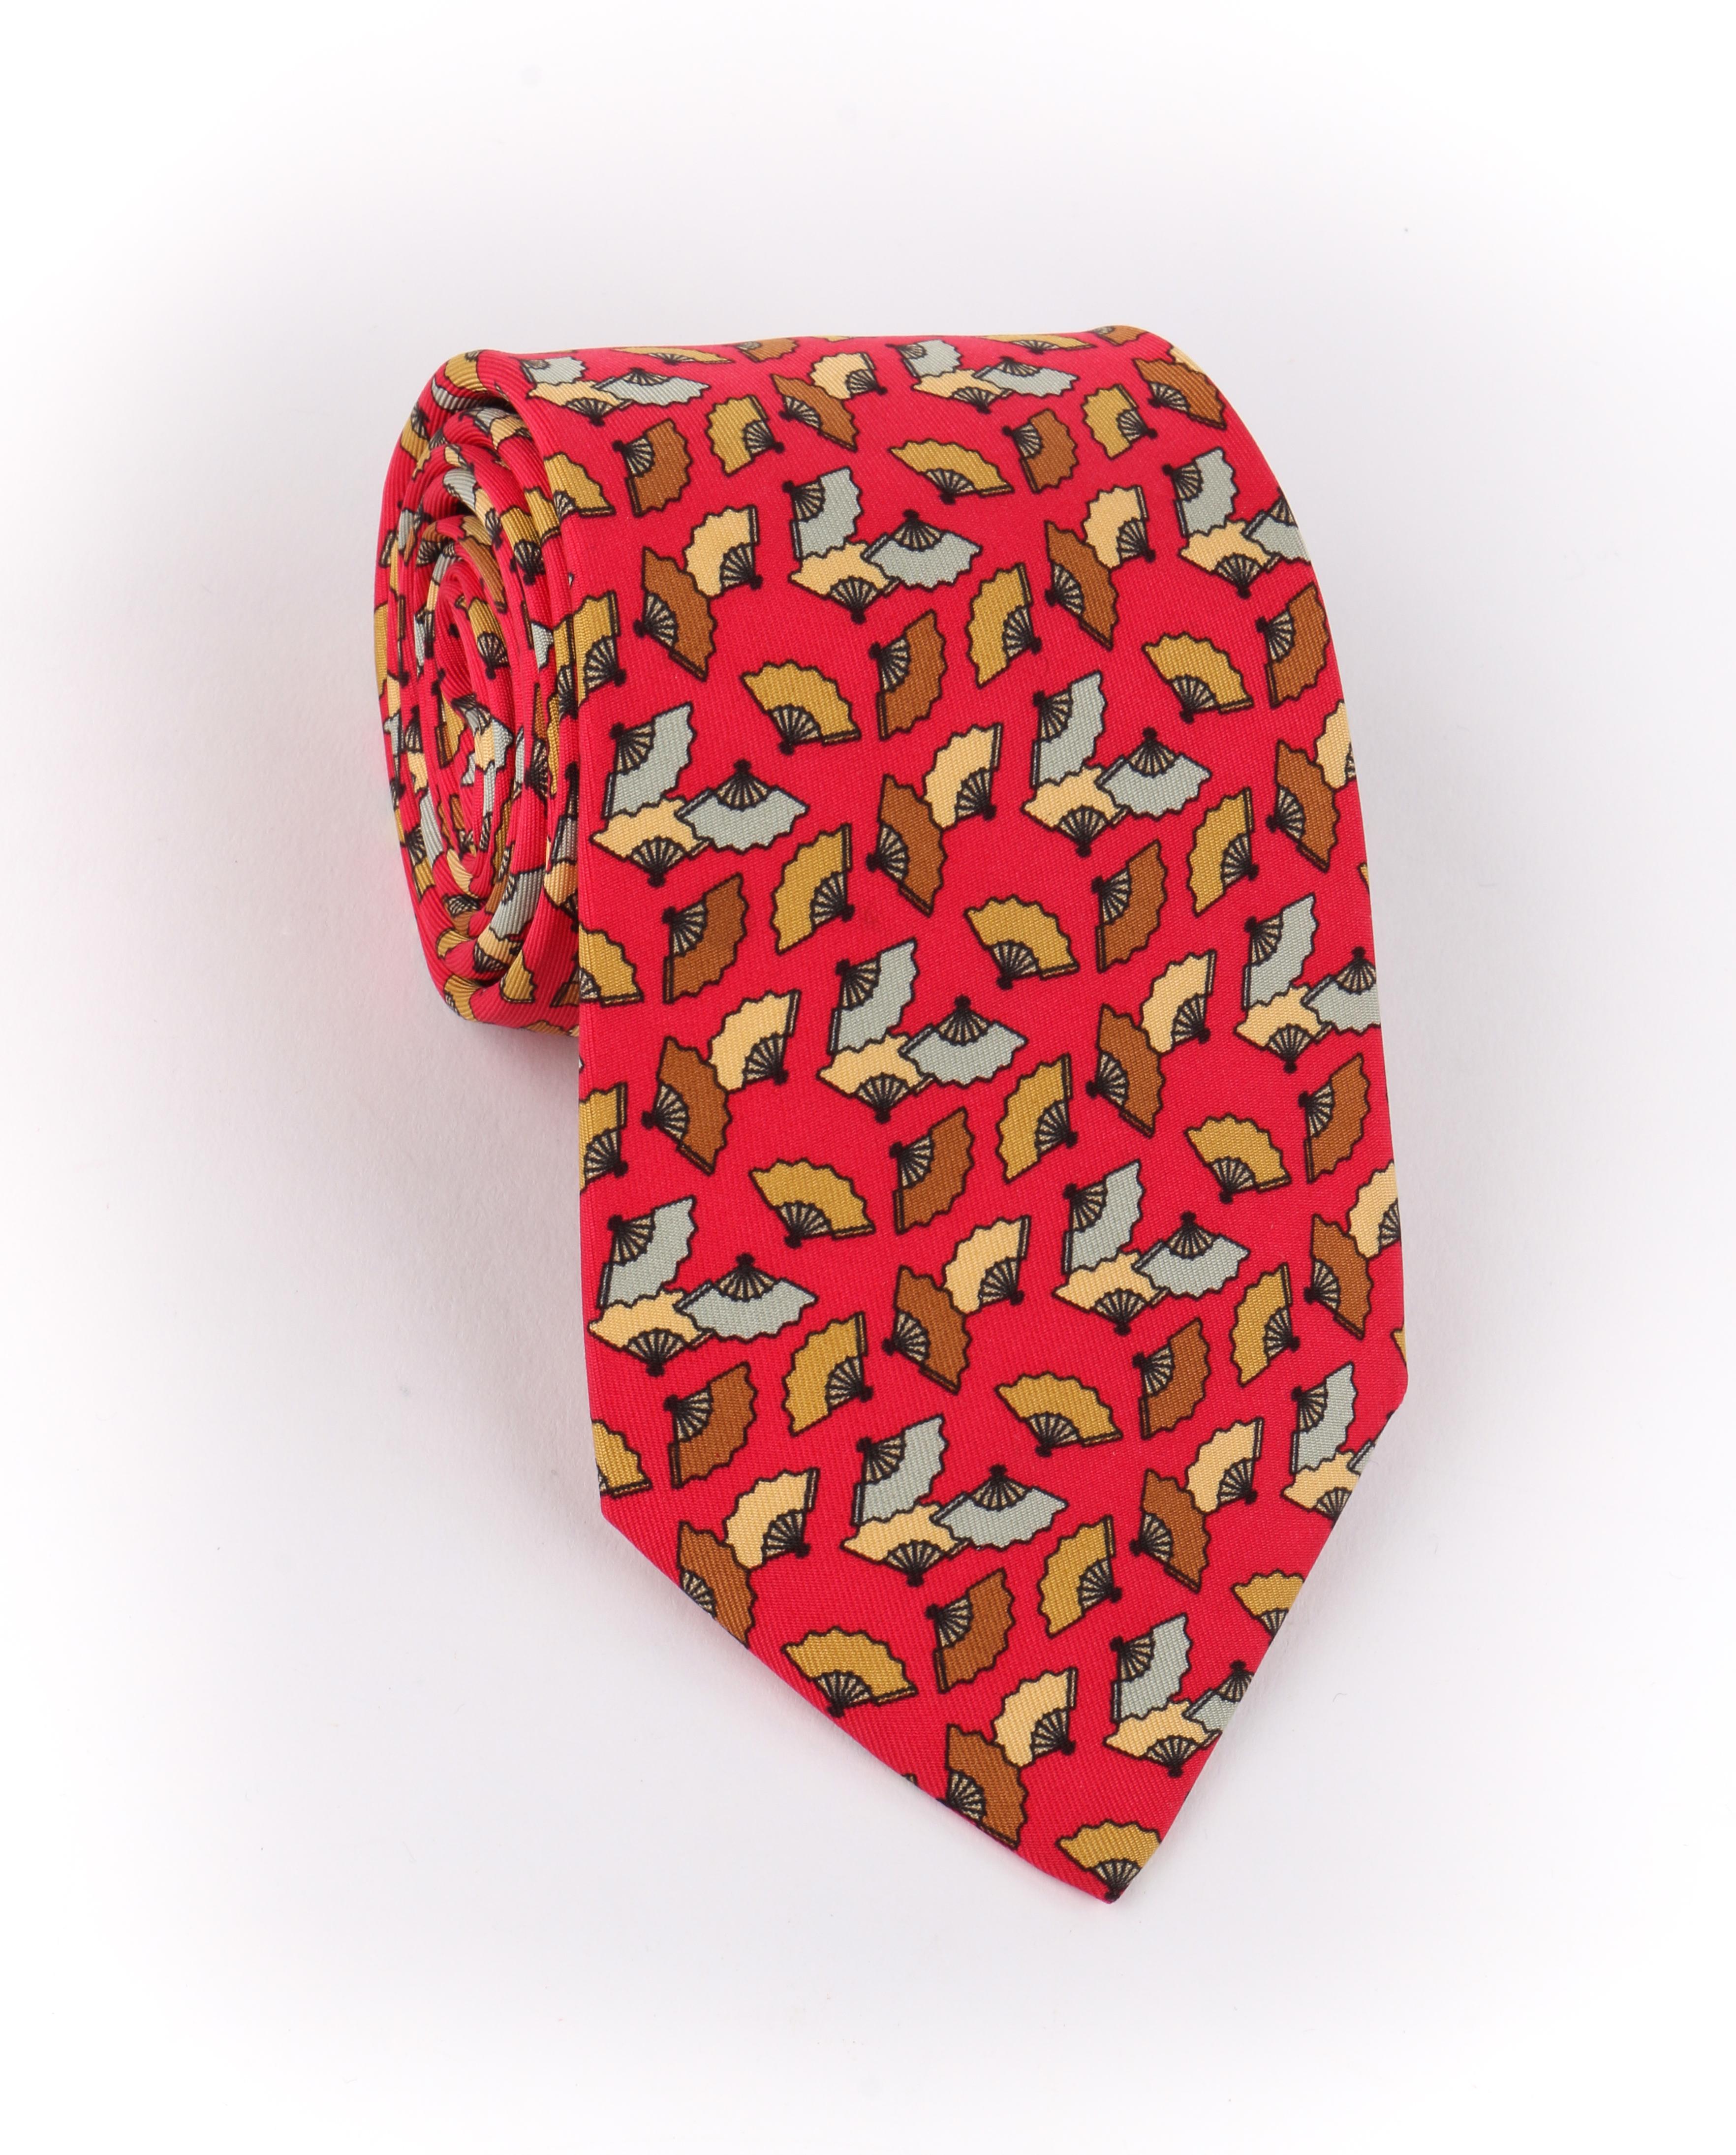 DESCRIPTION: HERMES Red Japanese Fan Print 5 Fold Silk Necktie Tie 7237 MA
 
Brand / Manufacturer: Hermes
Collection: 
Designer: 
Manufacturer Style Name: 
Style: 5 fold necktie
Color(s): Shades of red, brown, gold, gray, and black
Lined: Yes
Marked